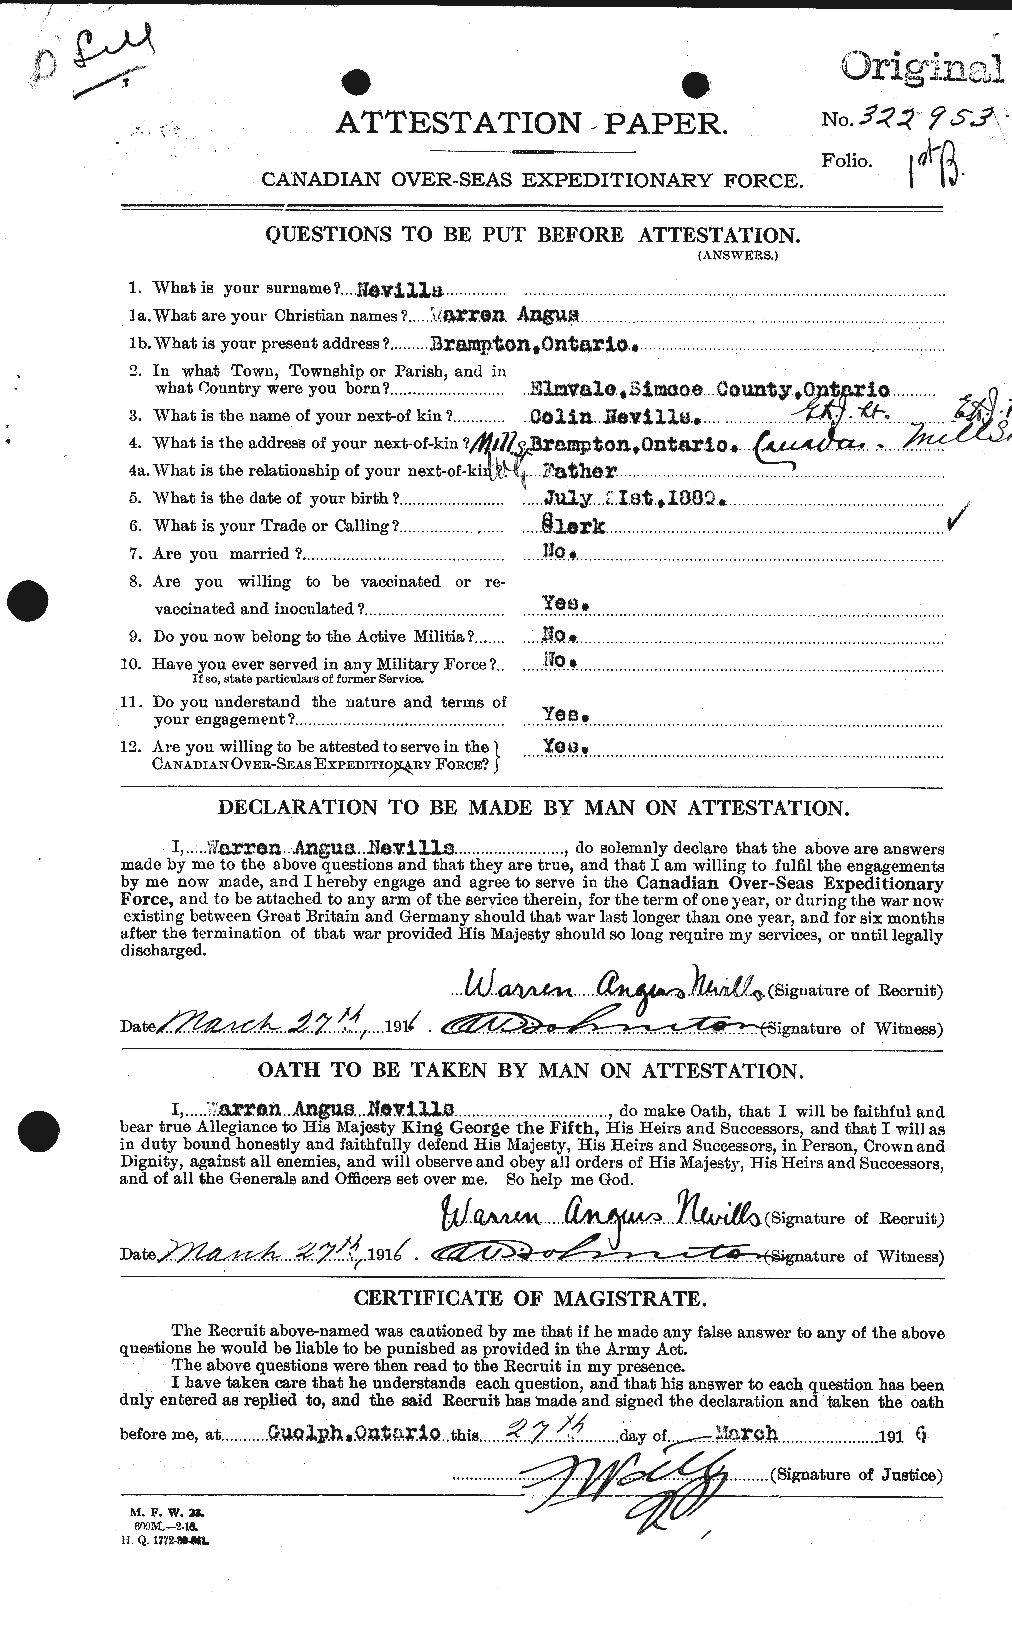 Personnel Records of the First World War - CEF 550431a